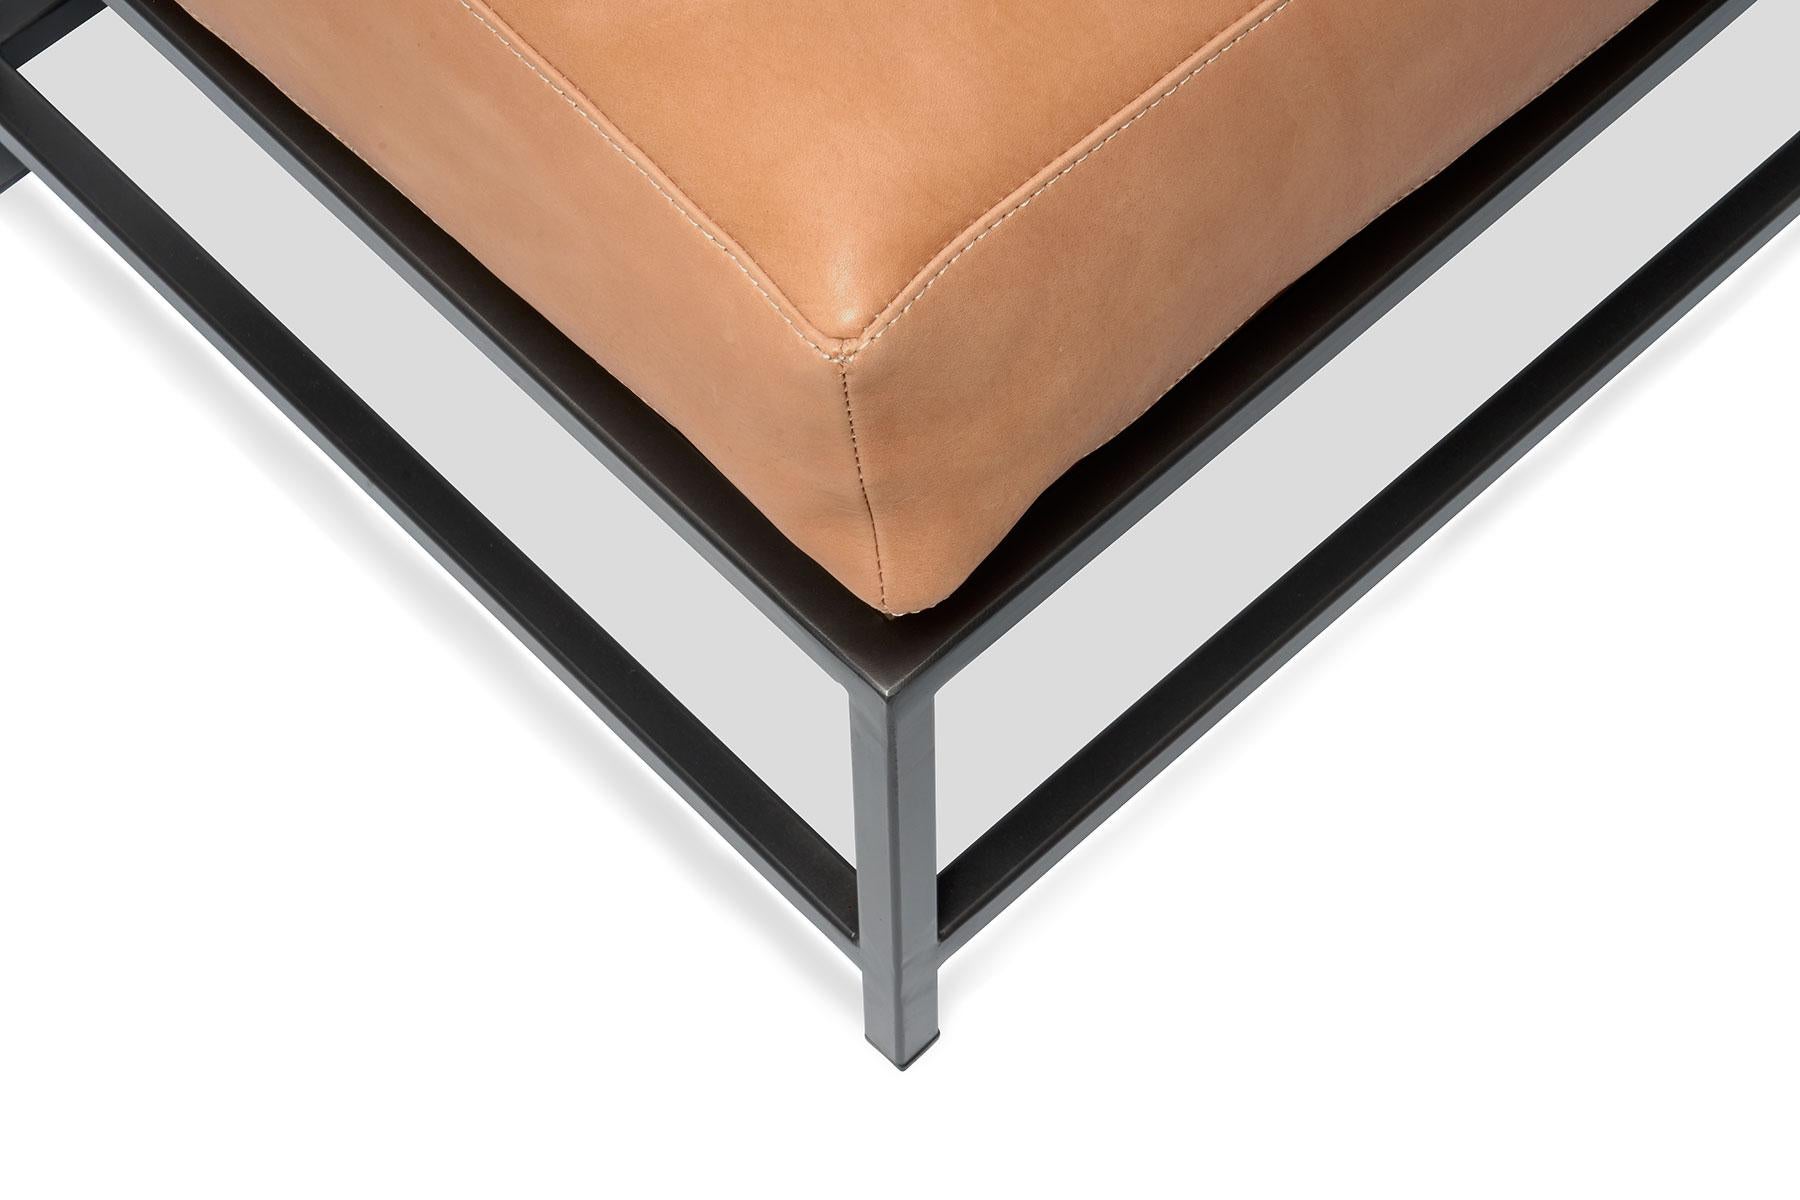 Contemporary Natural Veg Tan Leather and Blackened Steel Ottoman For Sale